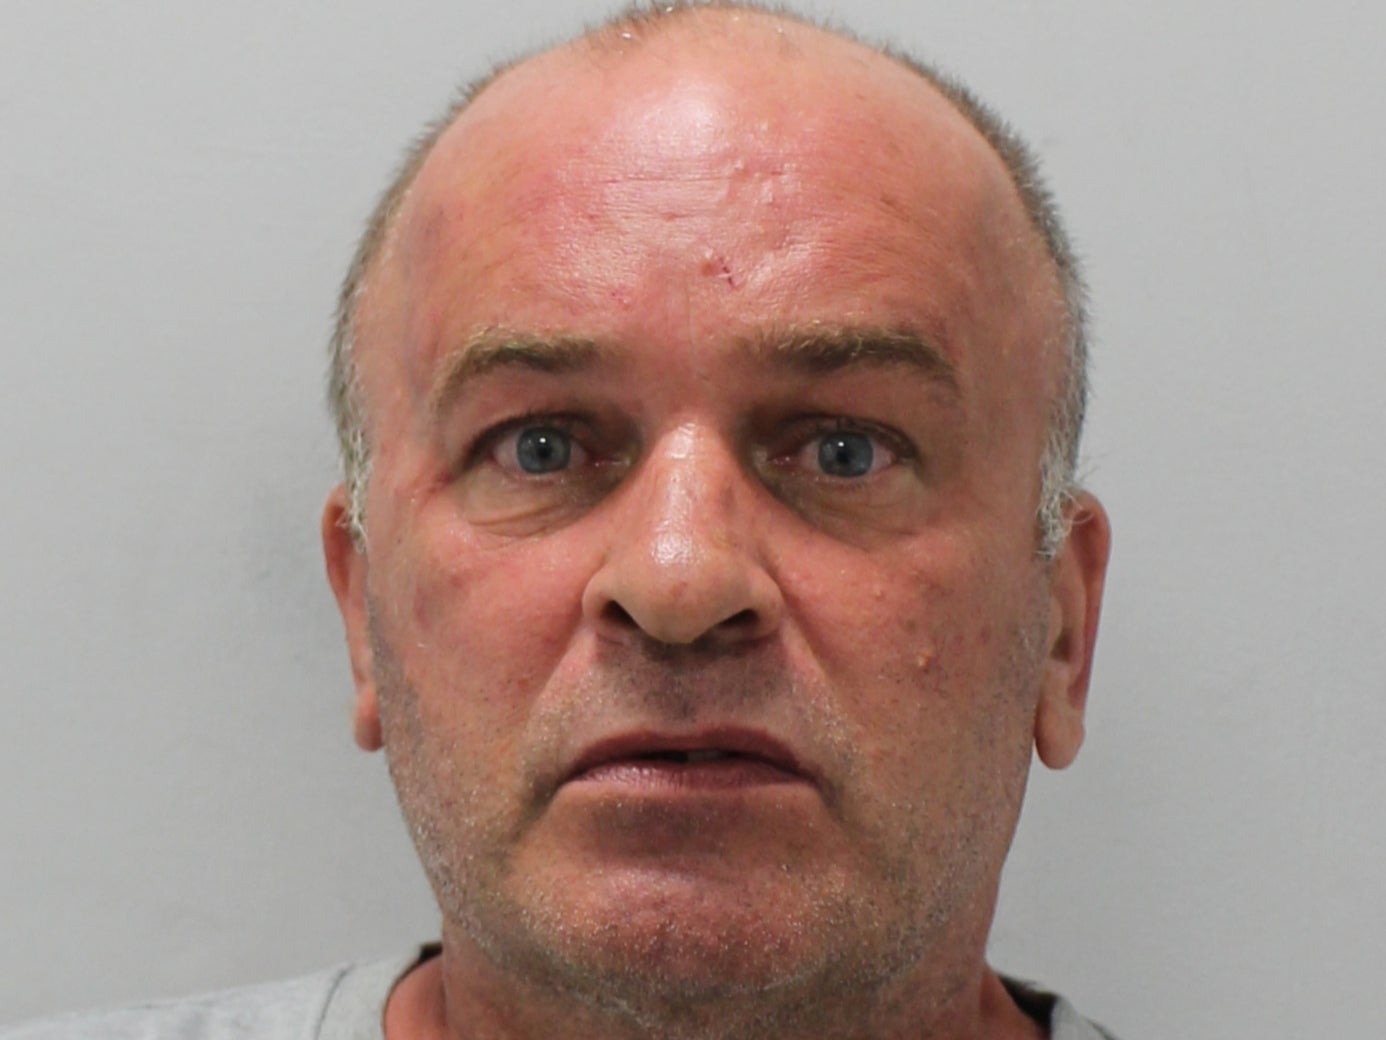 A man who stabbed his estranged wife in the street while shouting ‘I love you' has been jailed for attempted murder